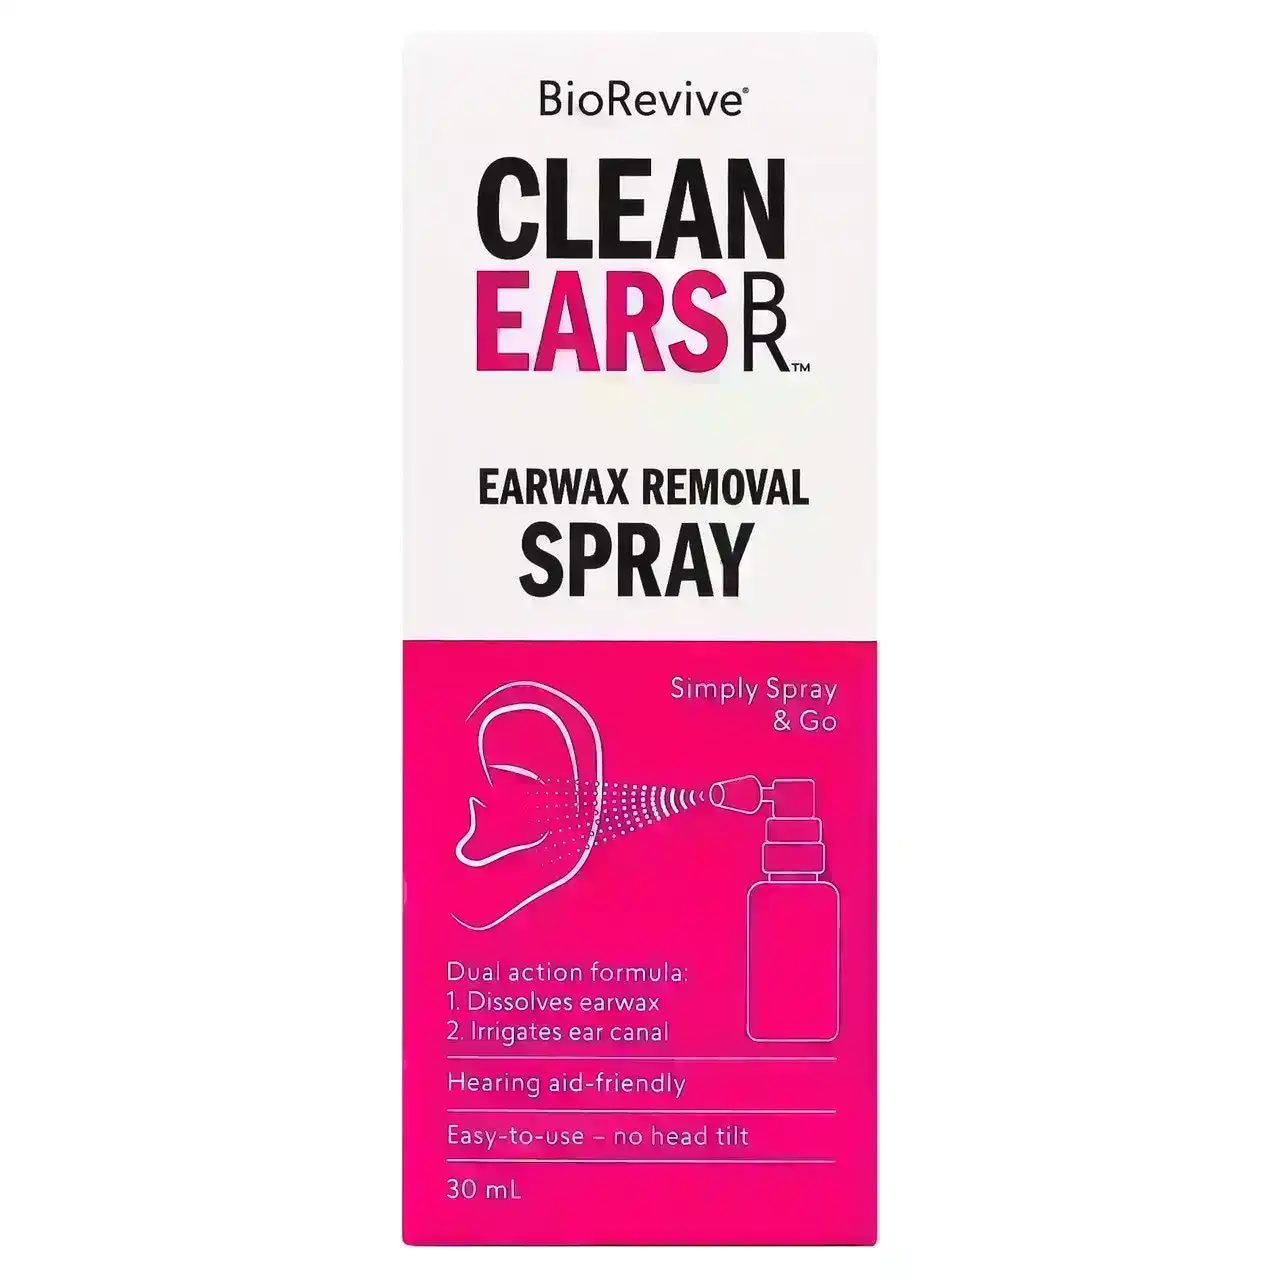 BioRevive CleanEars - Earwax Removal Spray 30mL